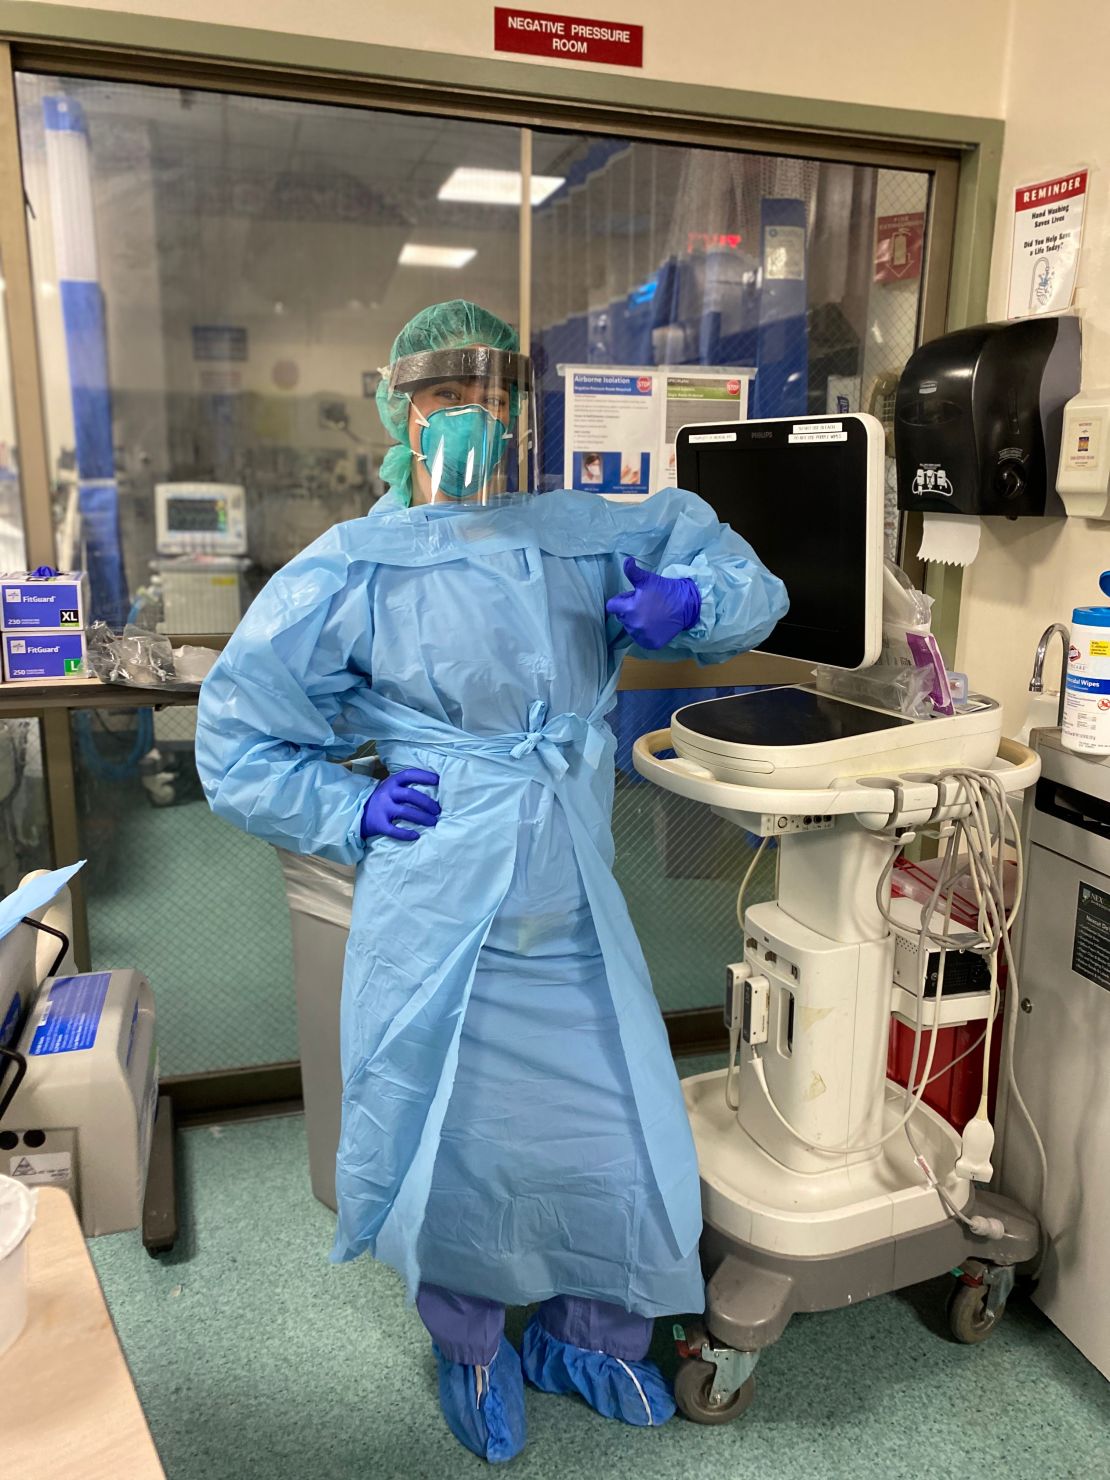 Dr. Amy Plasencia in protective gear.